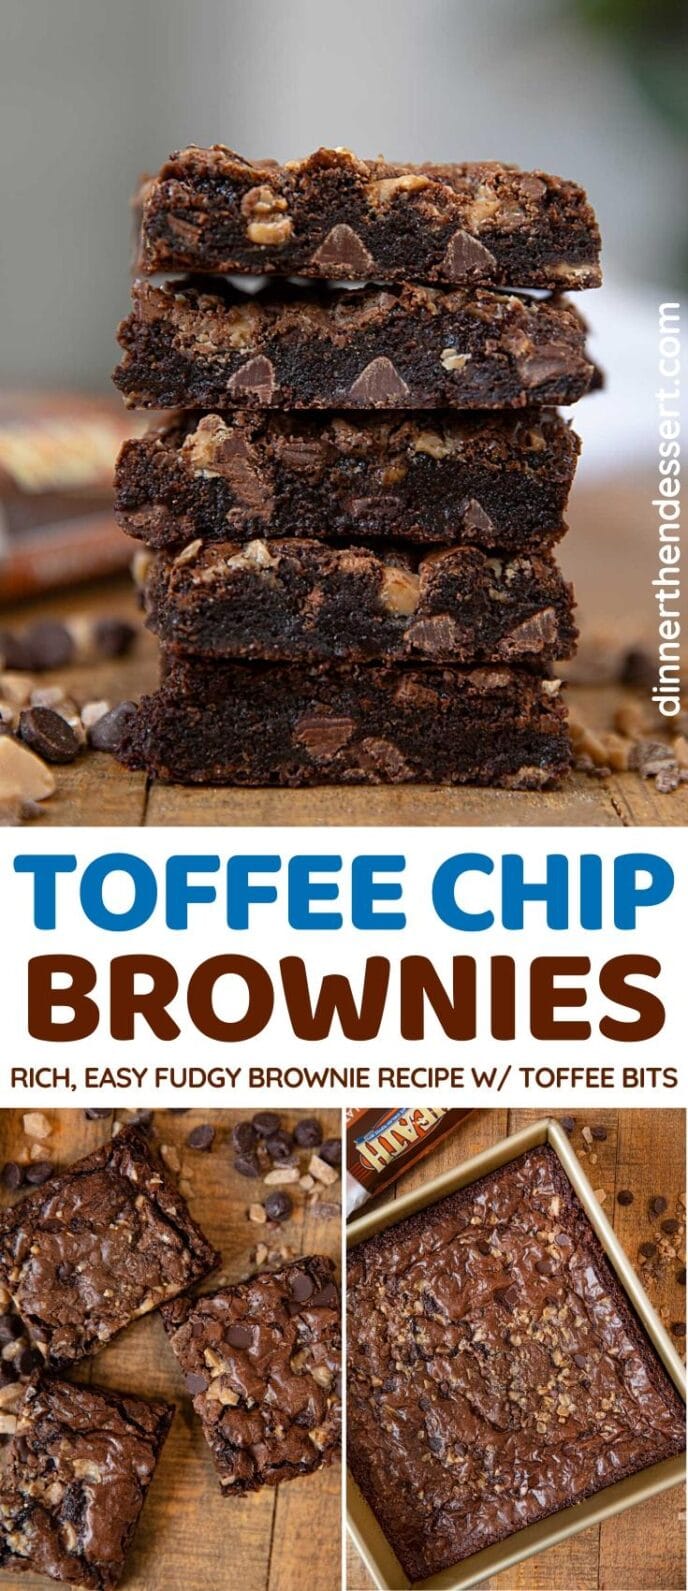 Toffee Chip Brownies collage